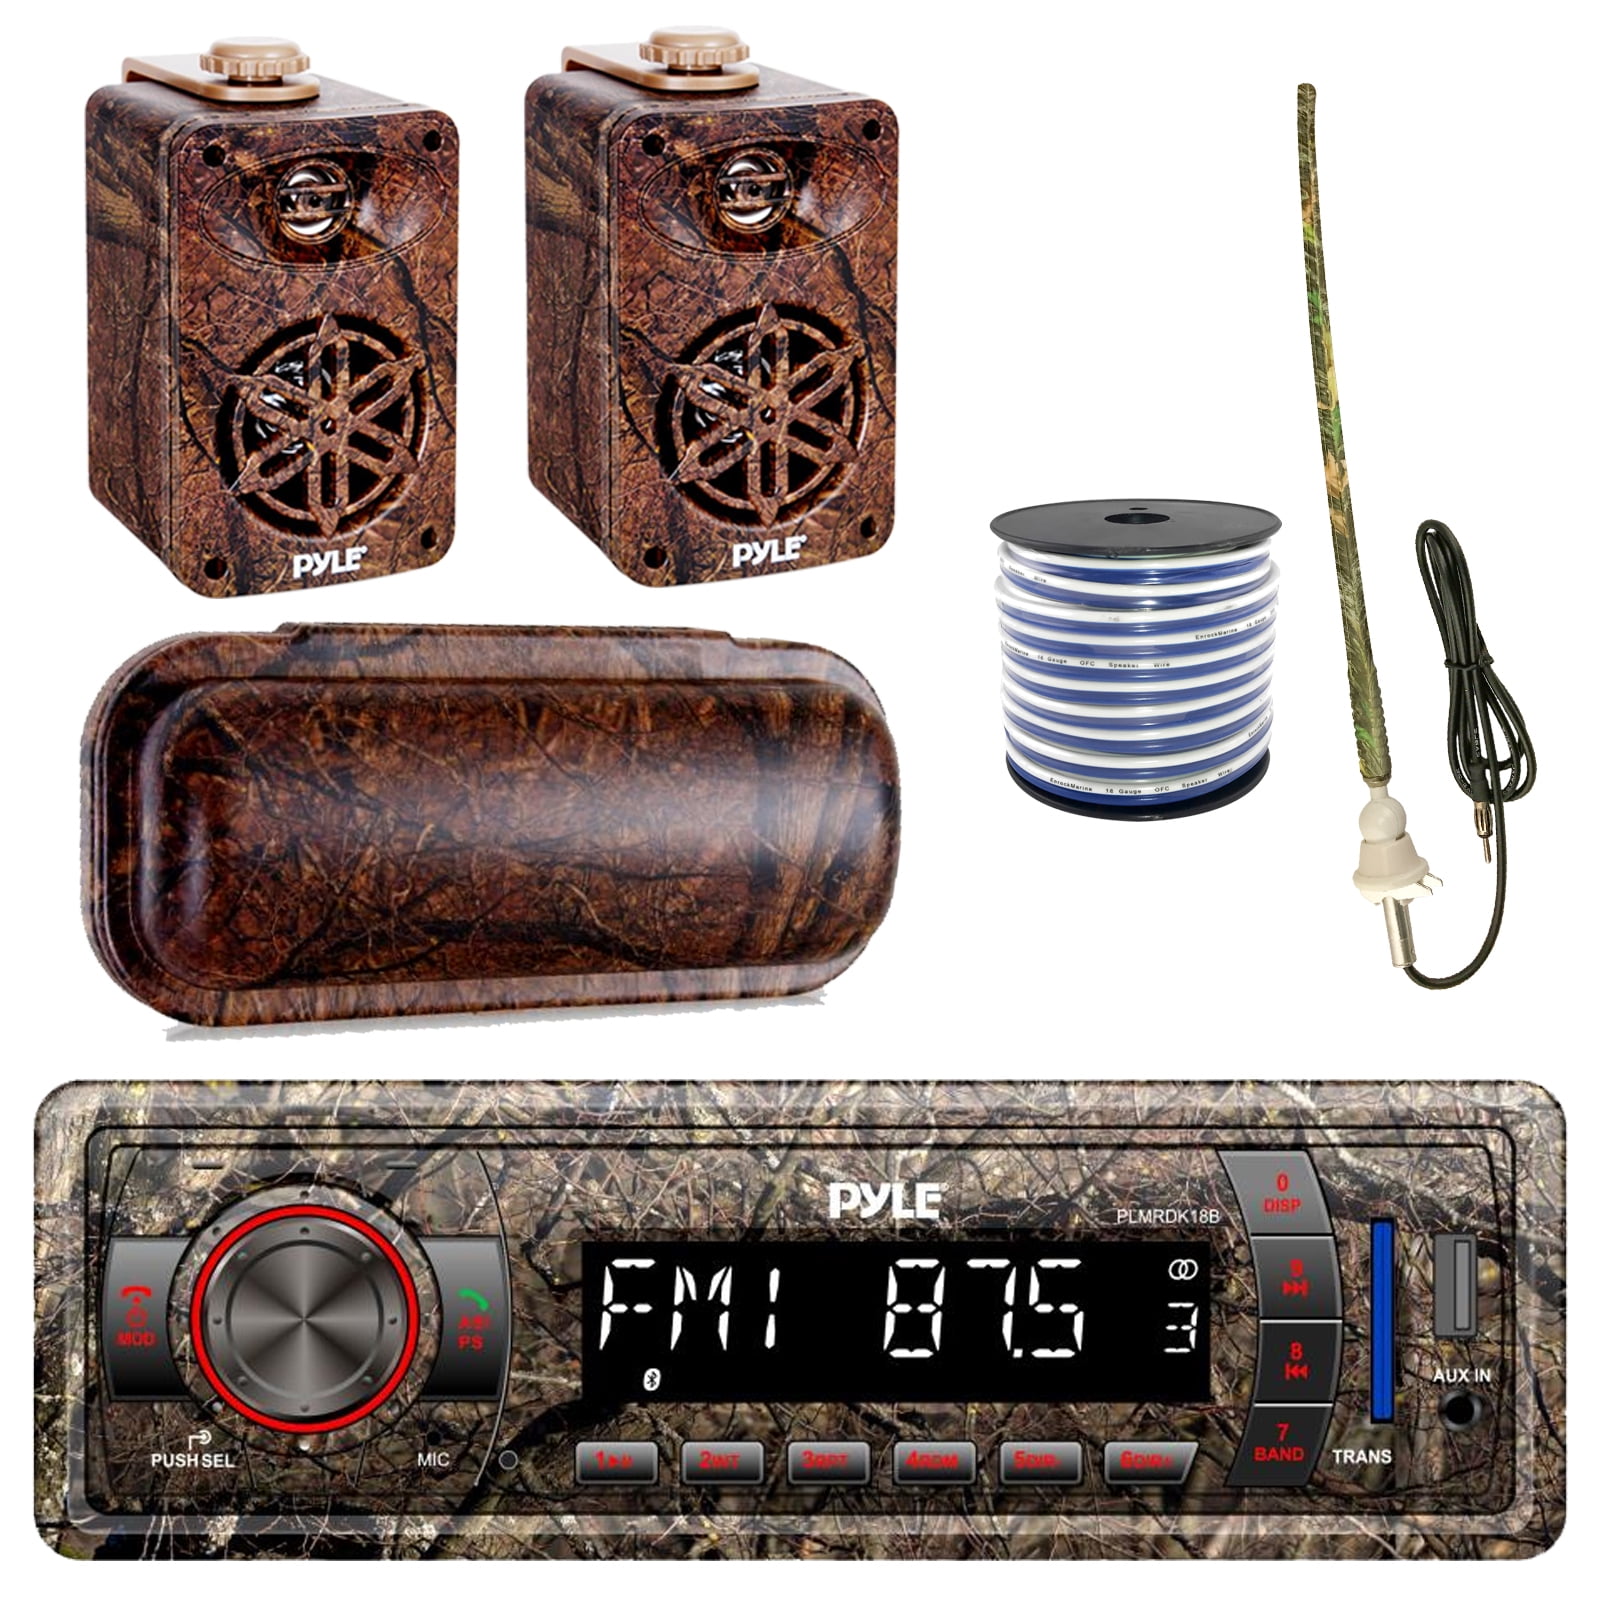 Pyle Marine Single-DIN Bluetooth MP3 USB AUX Camo AM/FM Radio, Pyle 3.5” Wall Mount Indoor / Outdoor 3-Way Camo Speakers (Pair), Stereo Shield Cover, Enrock Camouflage Boat Antenna, 18-G 50 Ft Wire